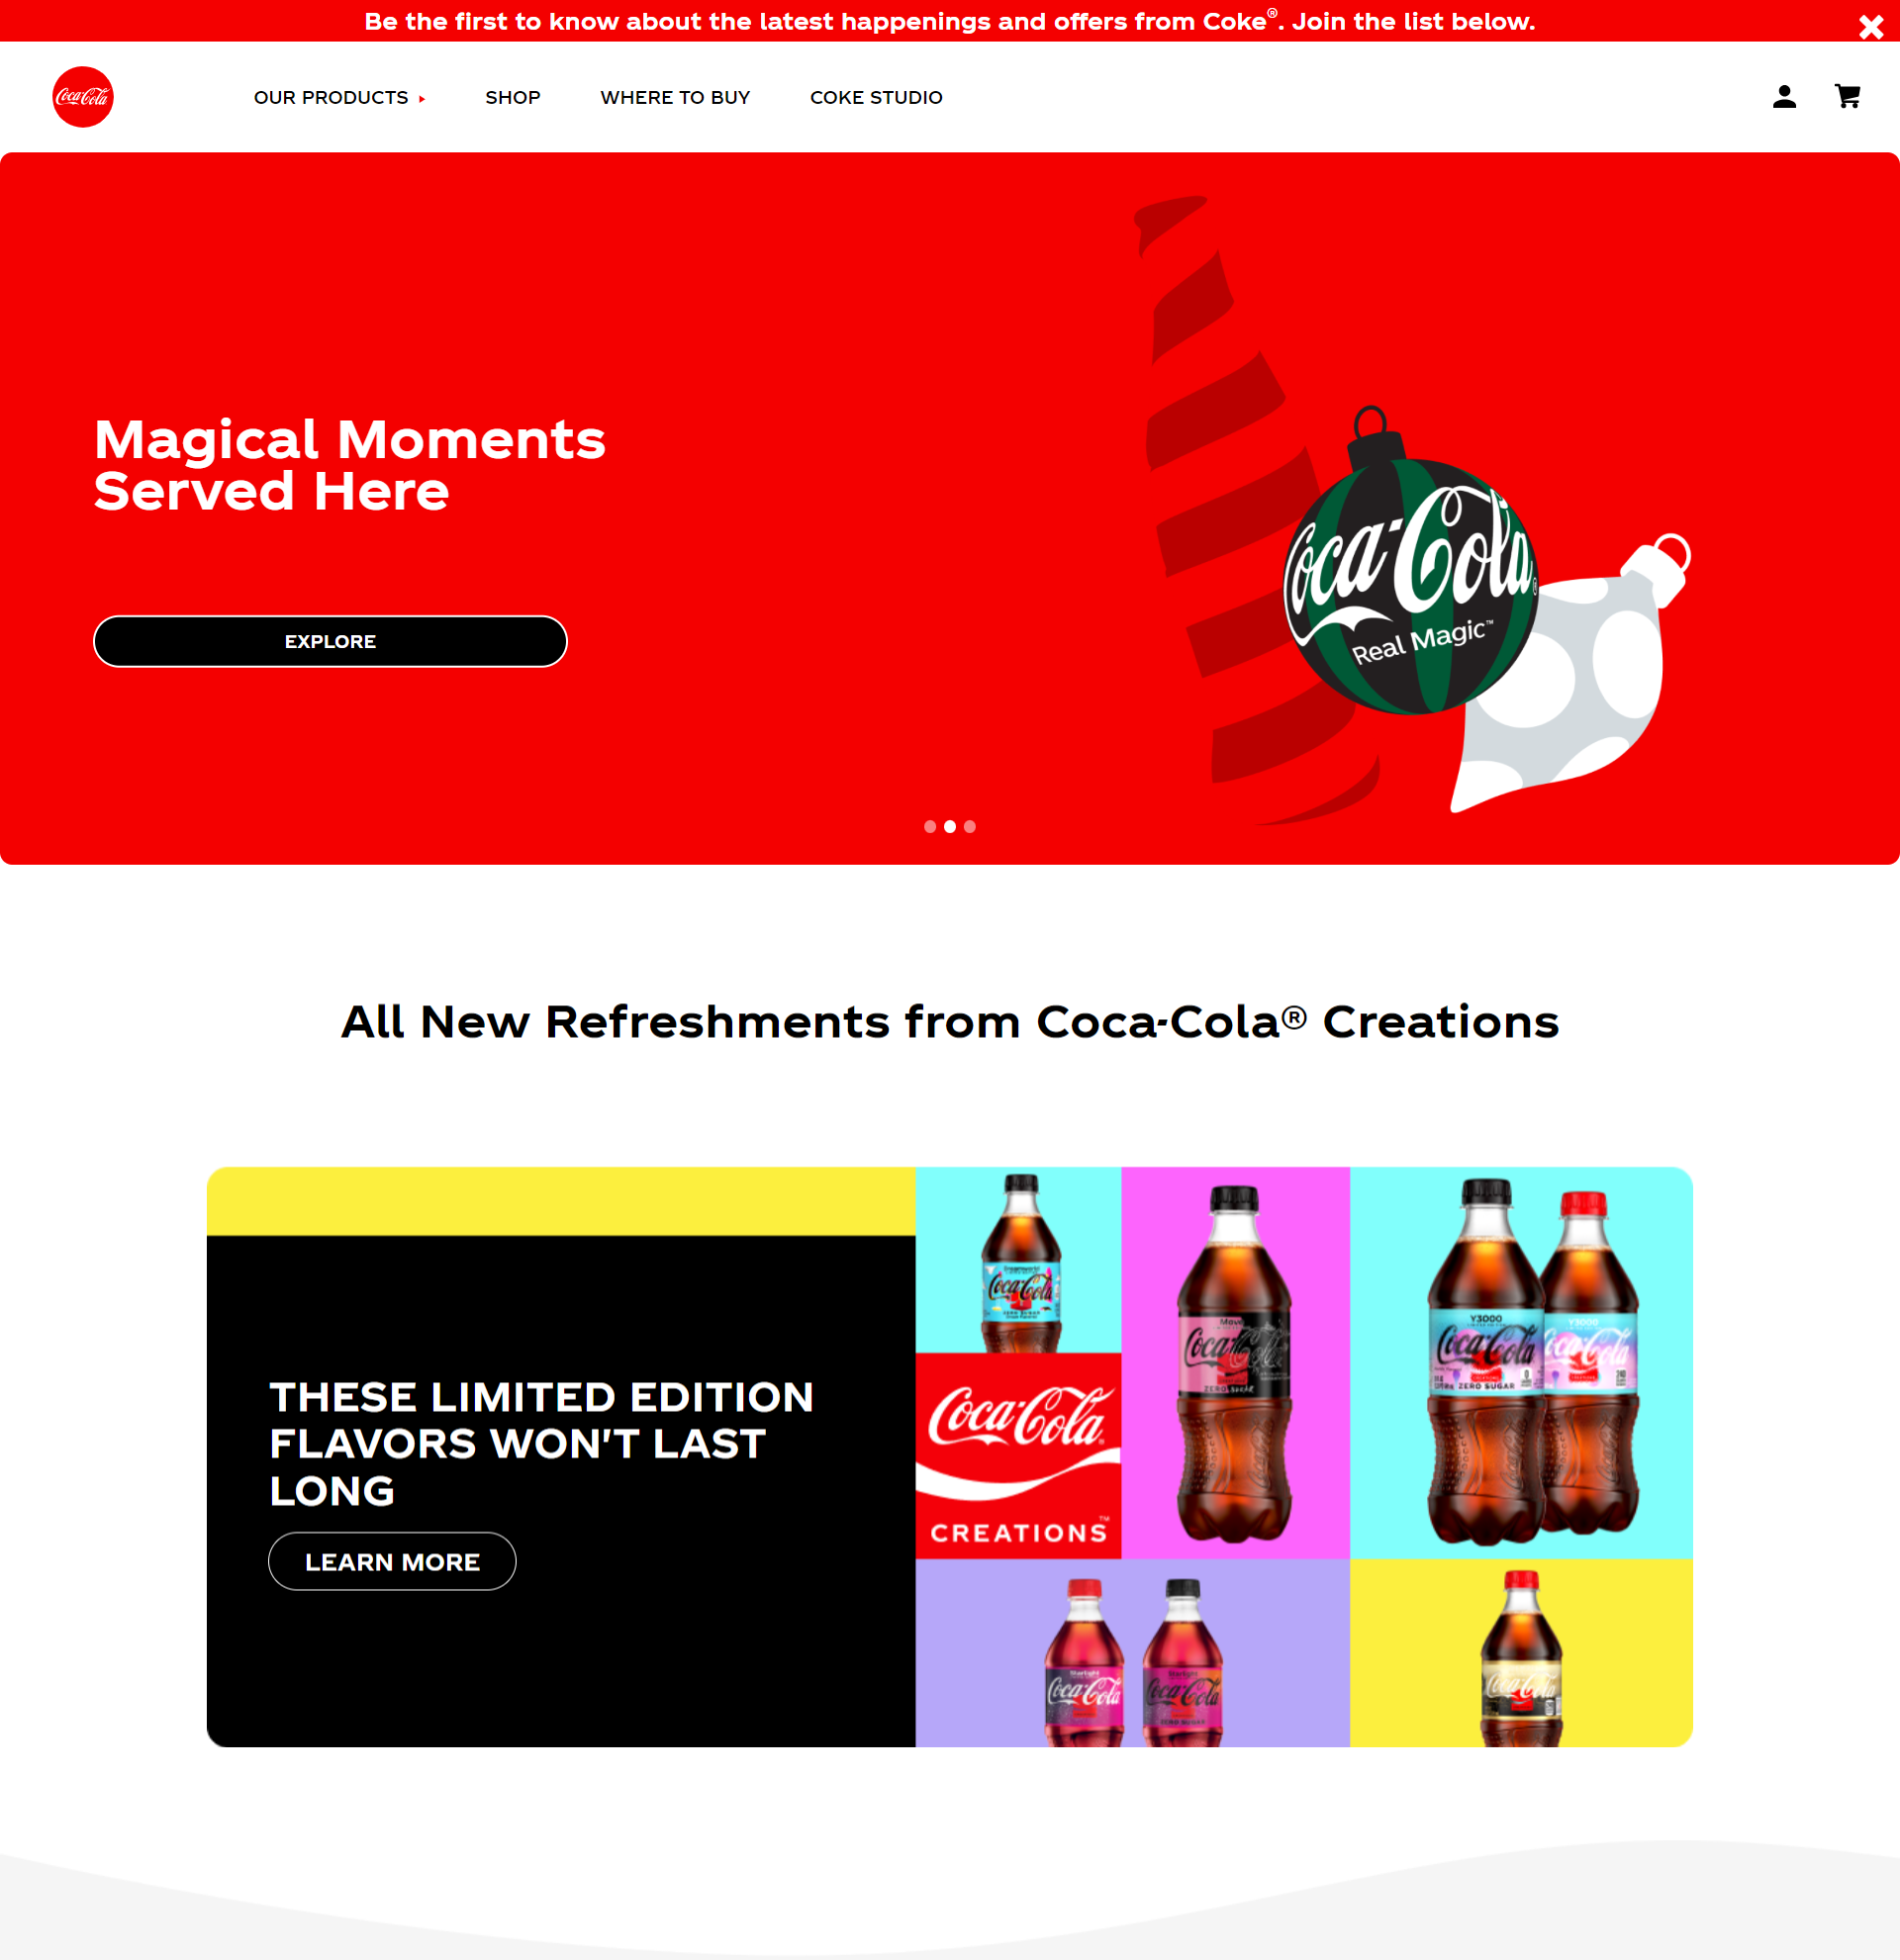 Coca Cola's use of red colour in their website